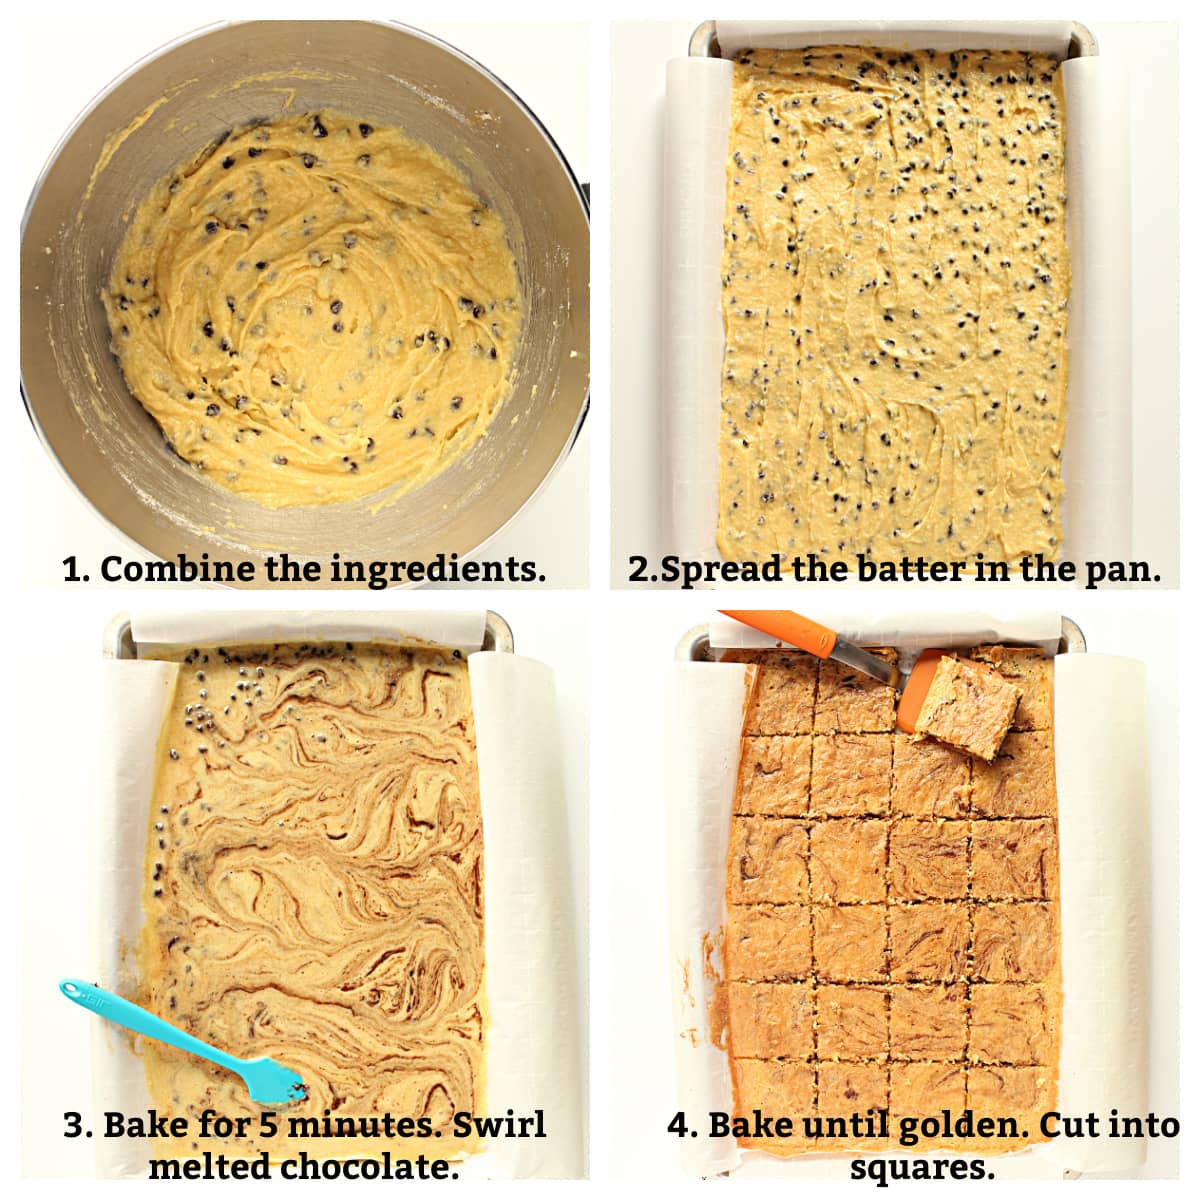 Recipe instructions; combine ingredients, spread into pan, bake, swirl melted chocolate, finish baking, cut into bars.